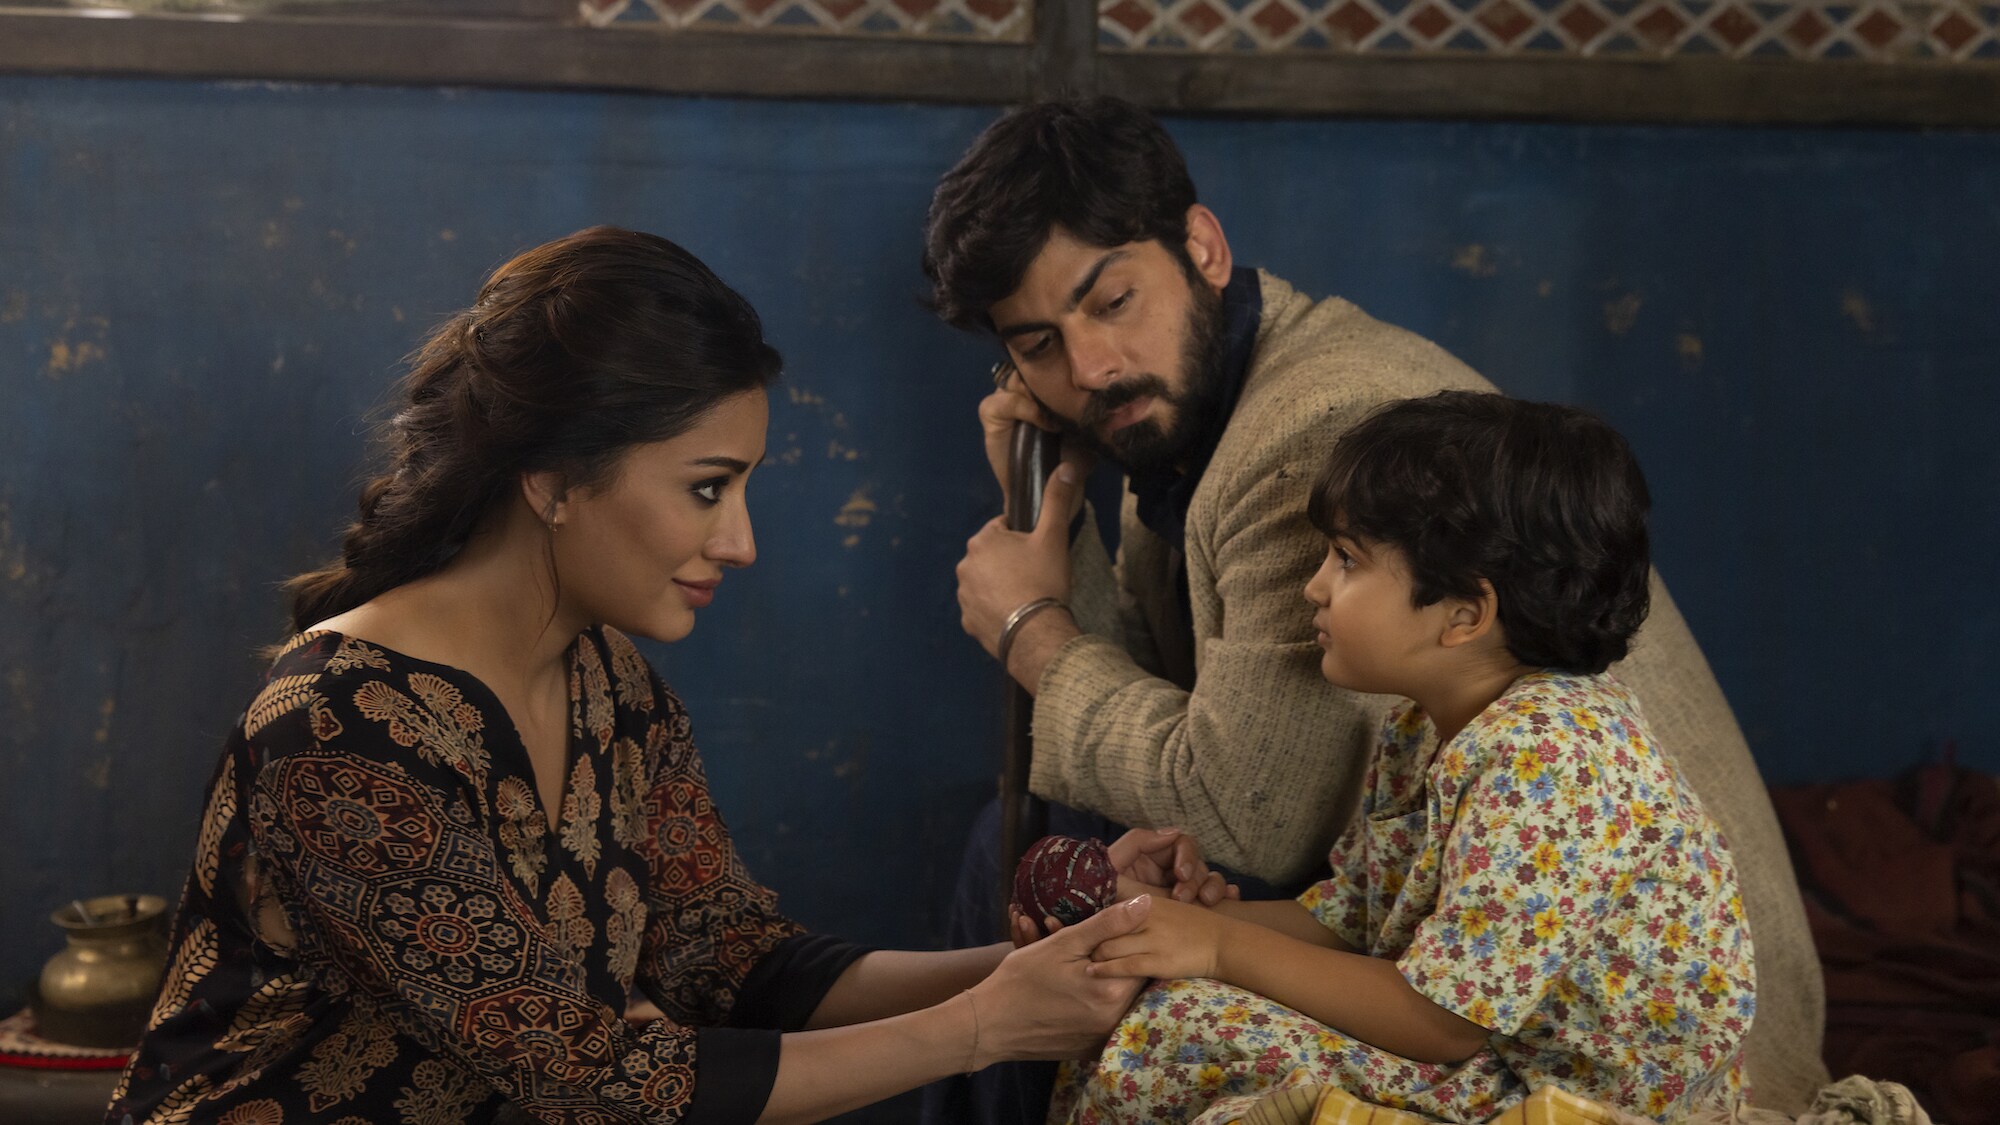 (L-R): Mehwish Hayat as Aisha, Fawad Kahn as Hasan, and Zion Usman as Young Sana in Marvel Studios' MS. MARVEL, exclusively on Disney+. Photo by Patrick Brown. ©Marvel Studios 2022. All Rights Reserved.